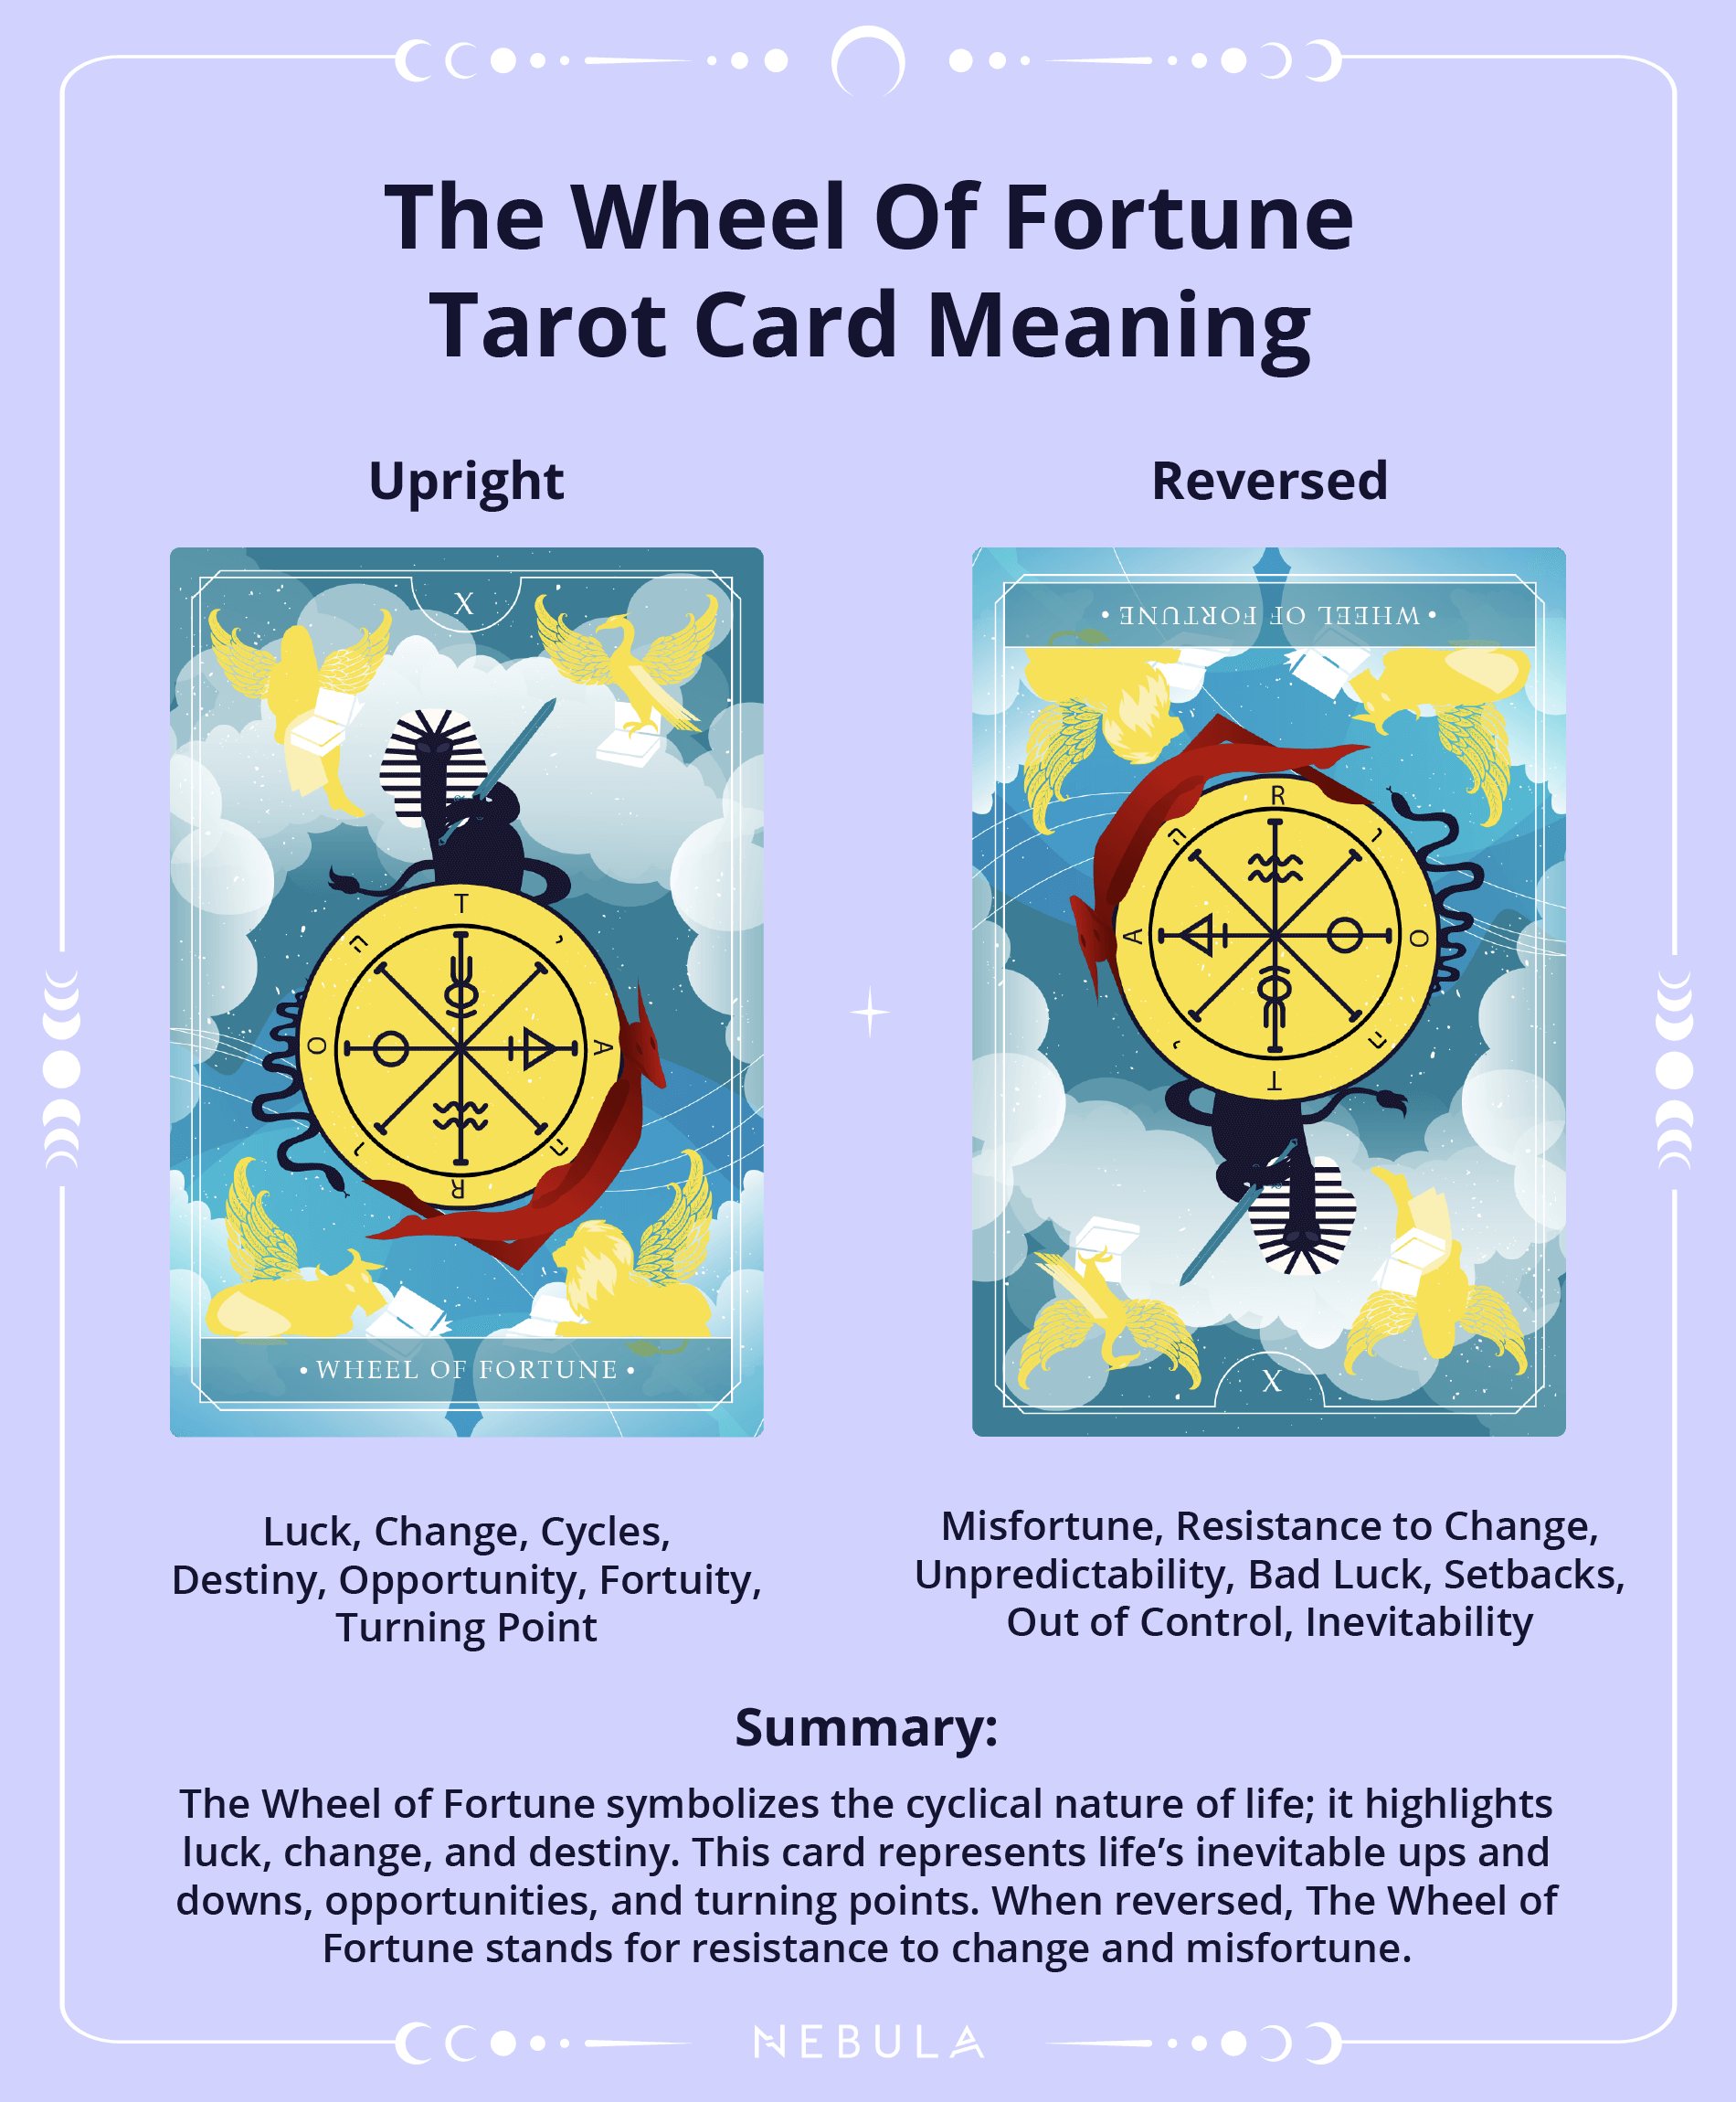 The Wheel Of Fortune Tarot Card Meaning